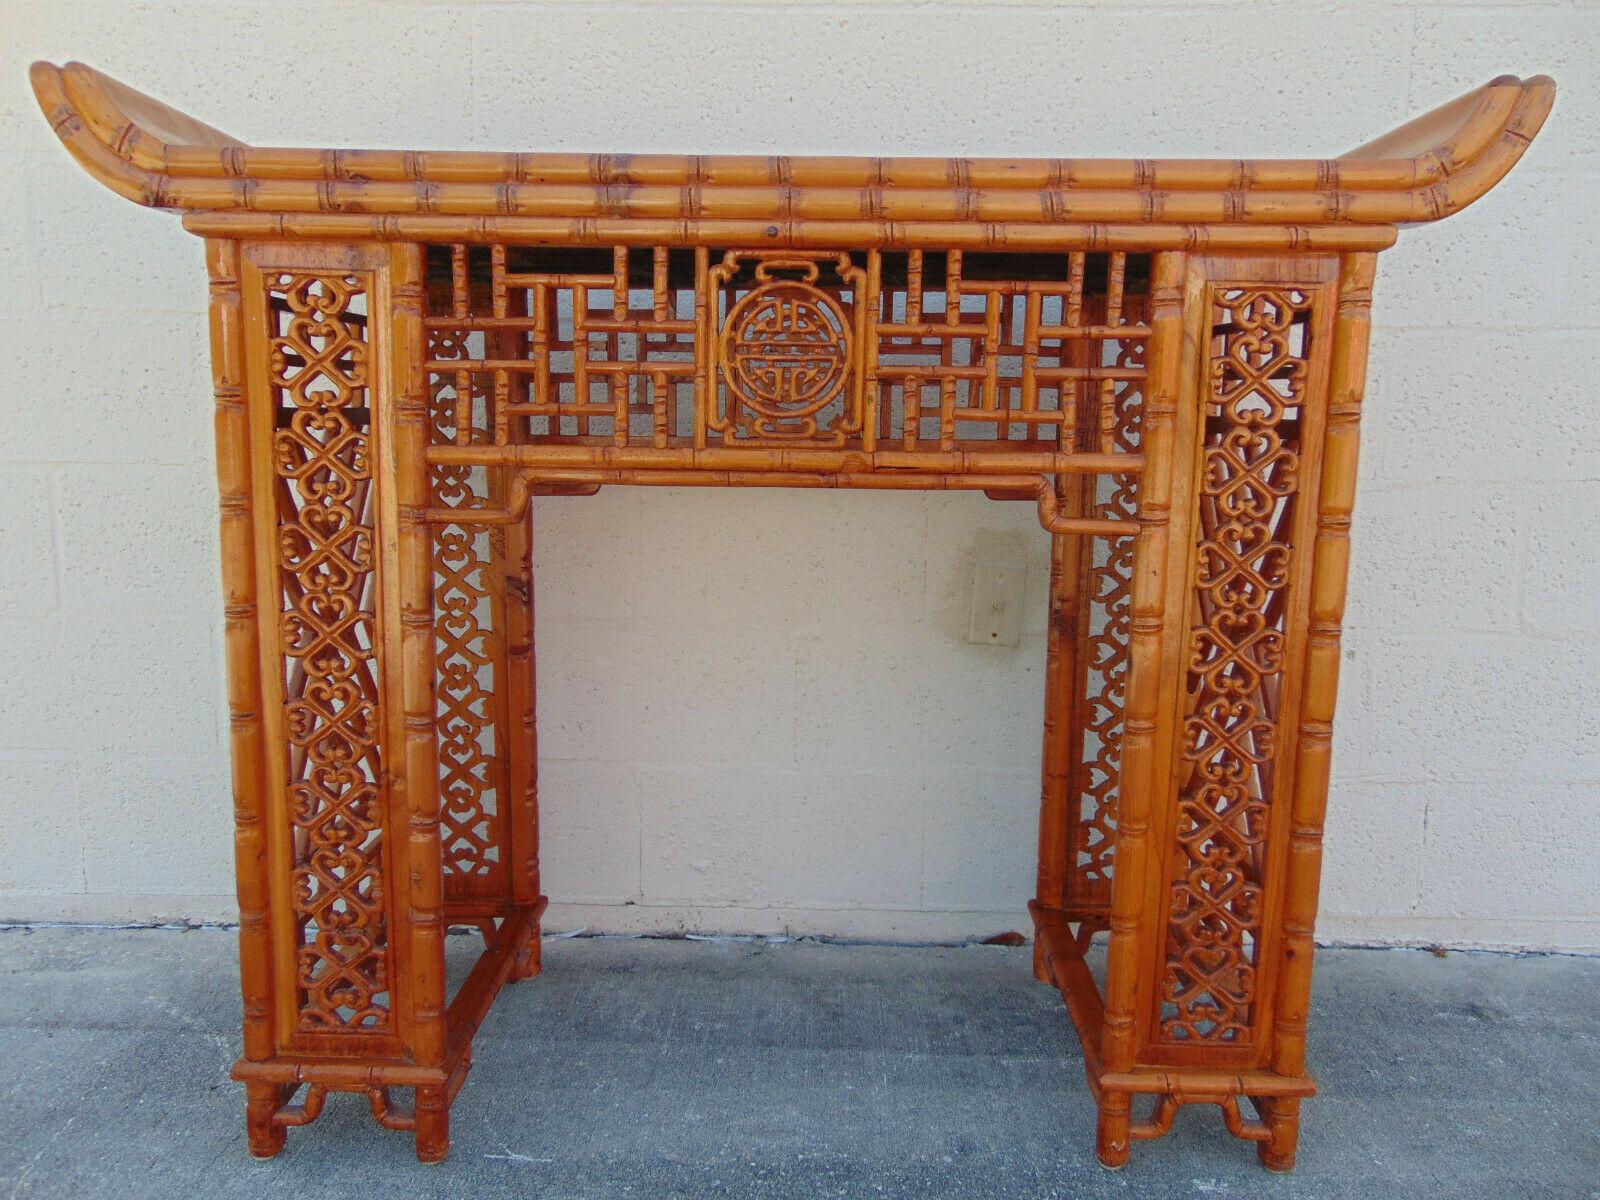 Stunning and unusual altar table or pagoda console with everted ends features intricately carved faux bamboo and open fretwork on the apron and legs, along with a Chinese Chippendale pattern on the sides. At 39 inches high, it is a wonderful piece